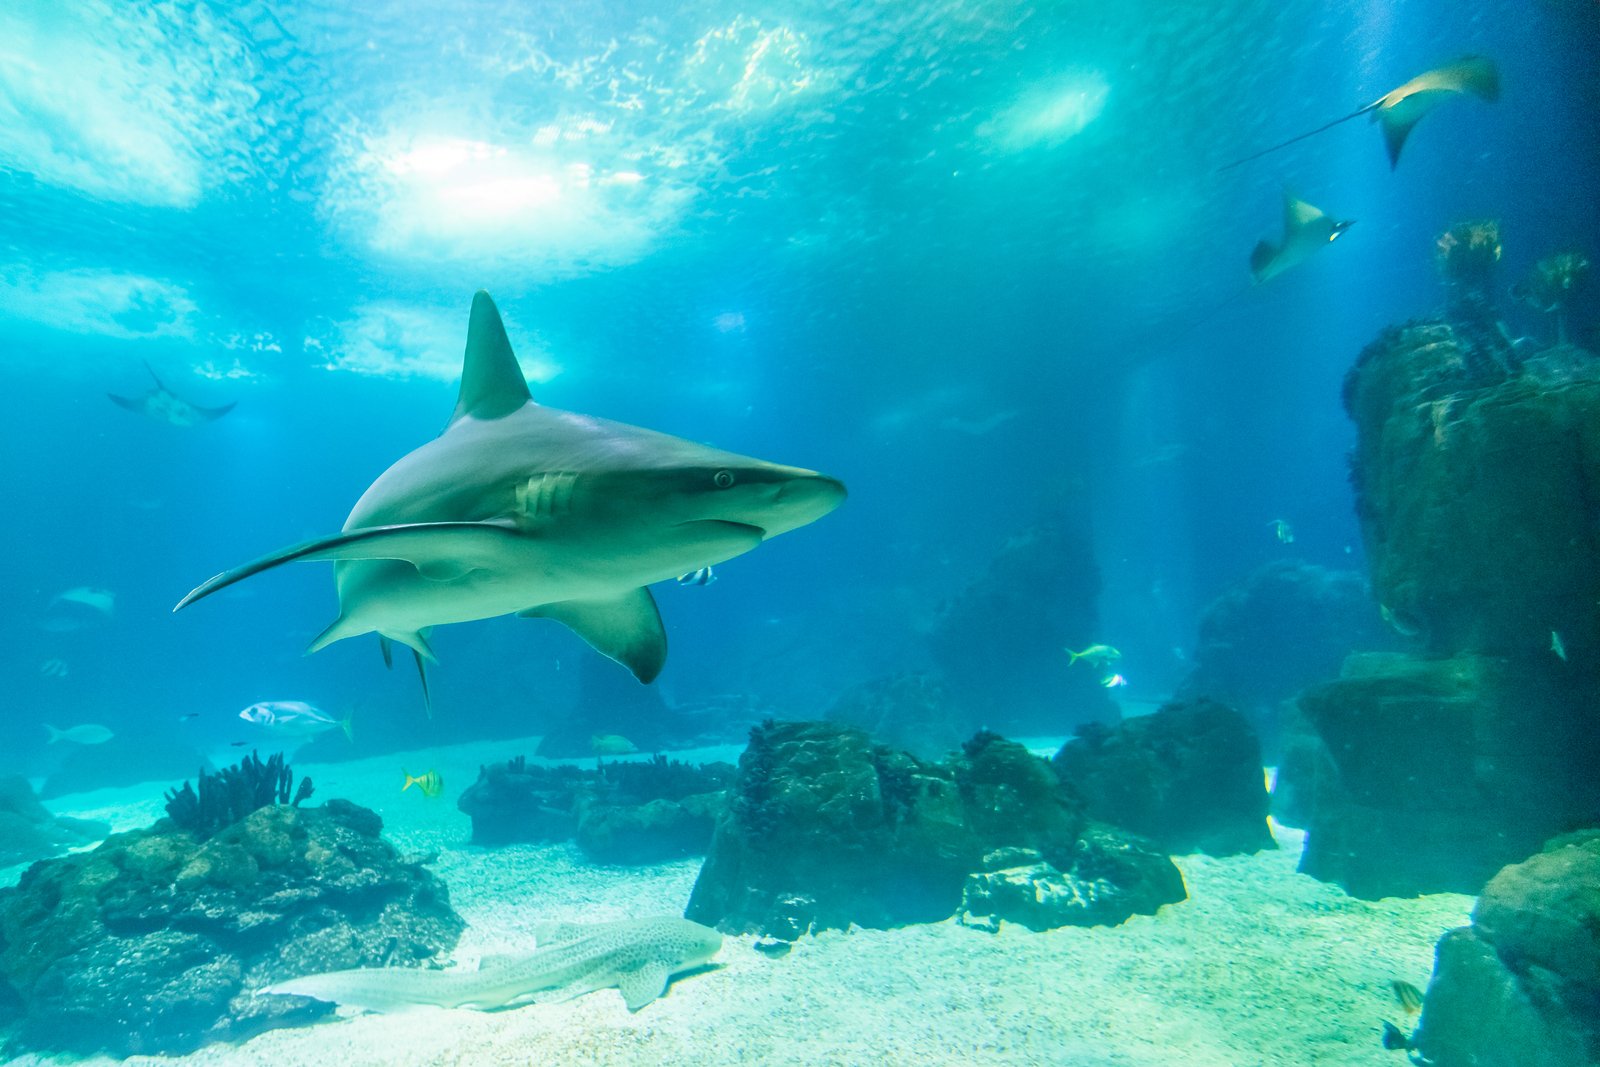 Enjoy #SharkWeek every week in these states as a Traveling Therapist